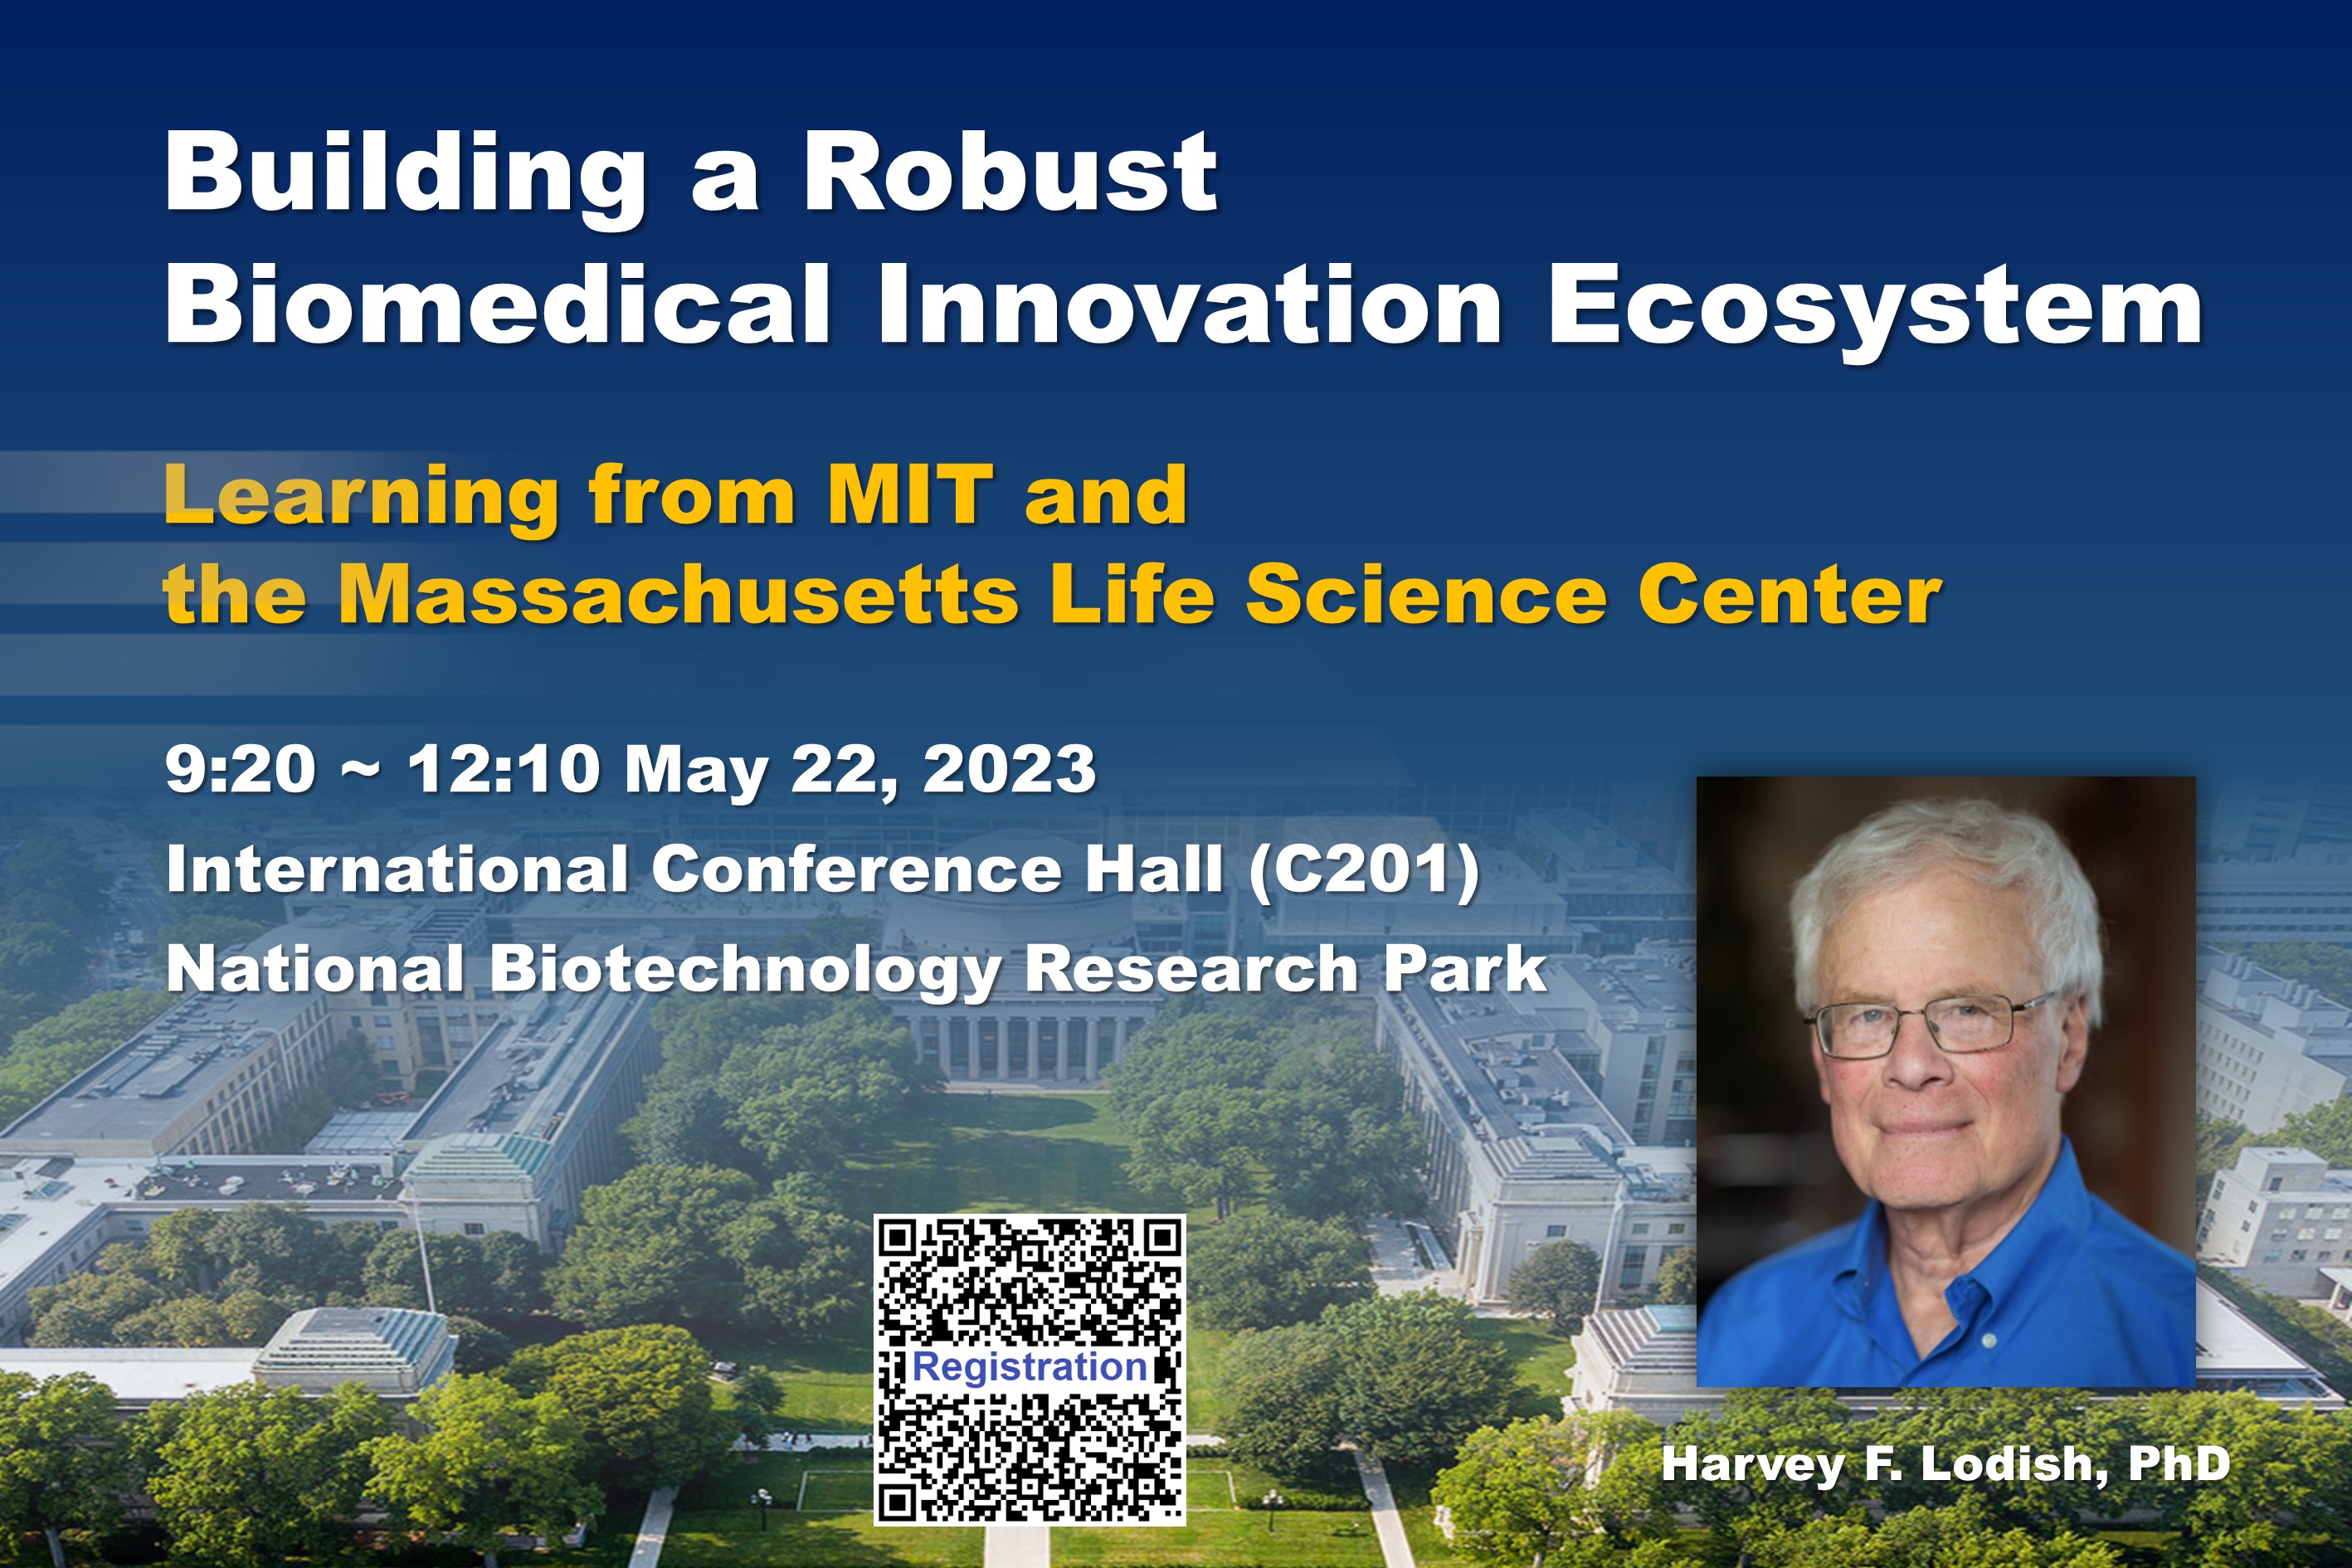 Building a Robust Biomedical Innovation Ecosystem -- Learning from MIT and the Massachusetts Life Science Center